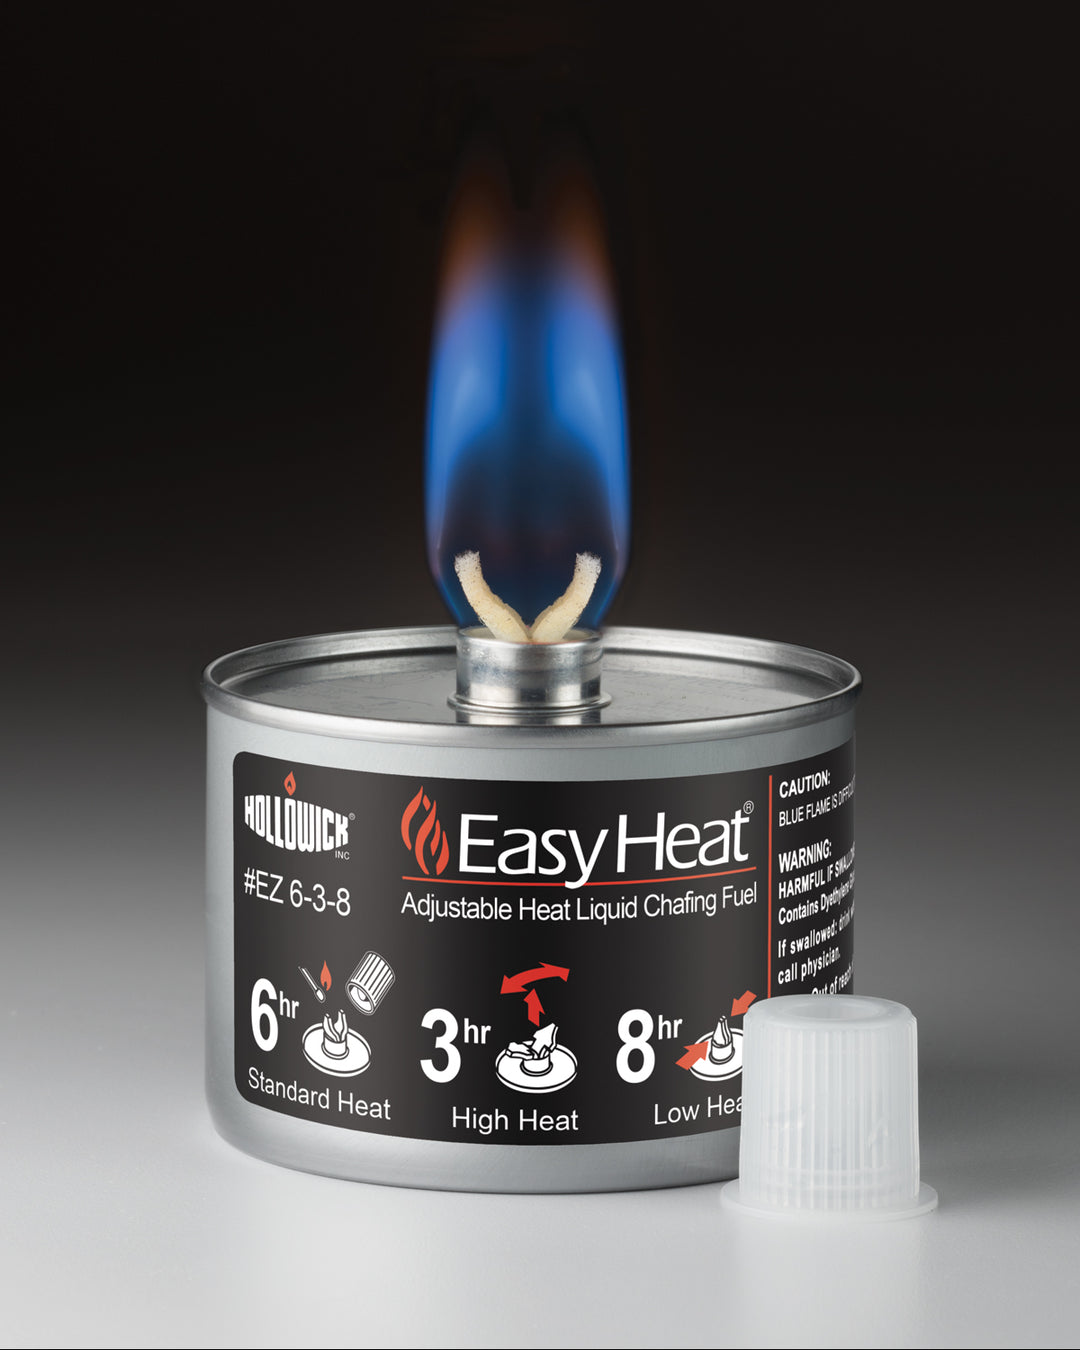 Hollowick Inc. Easy Heat Chafing Fuel-24 Each